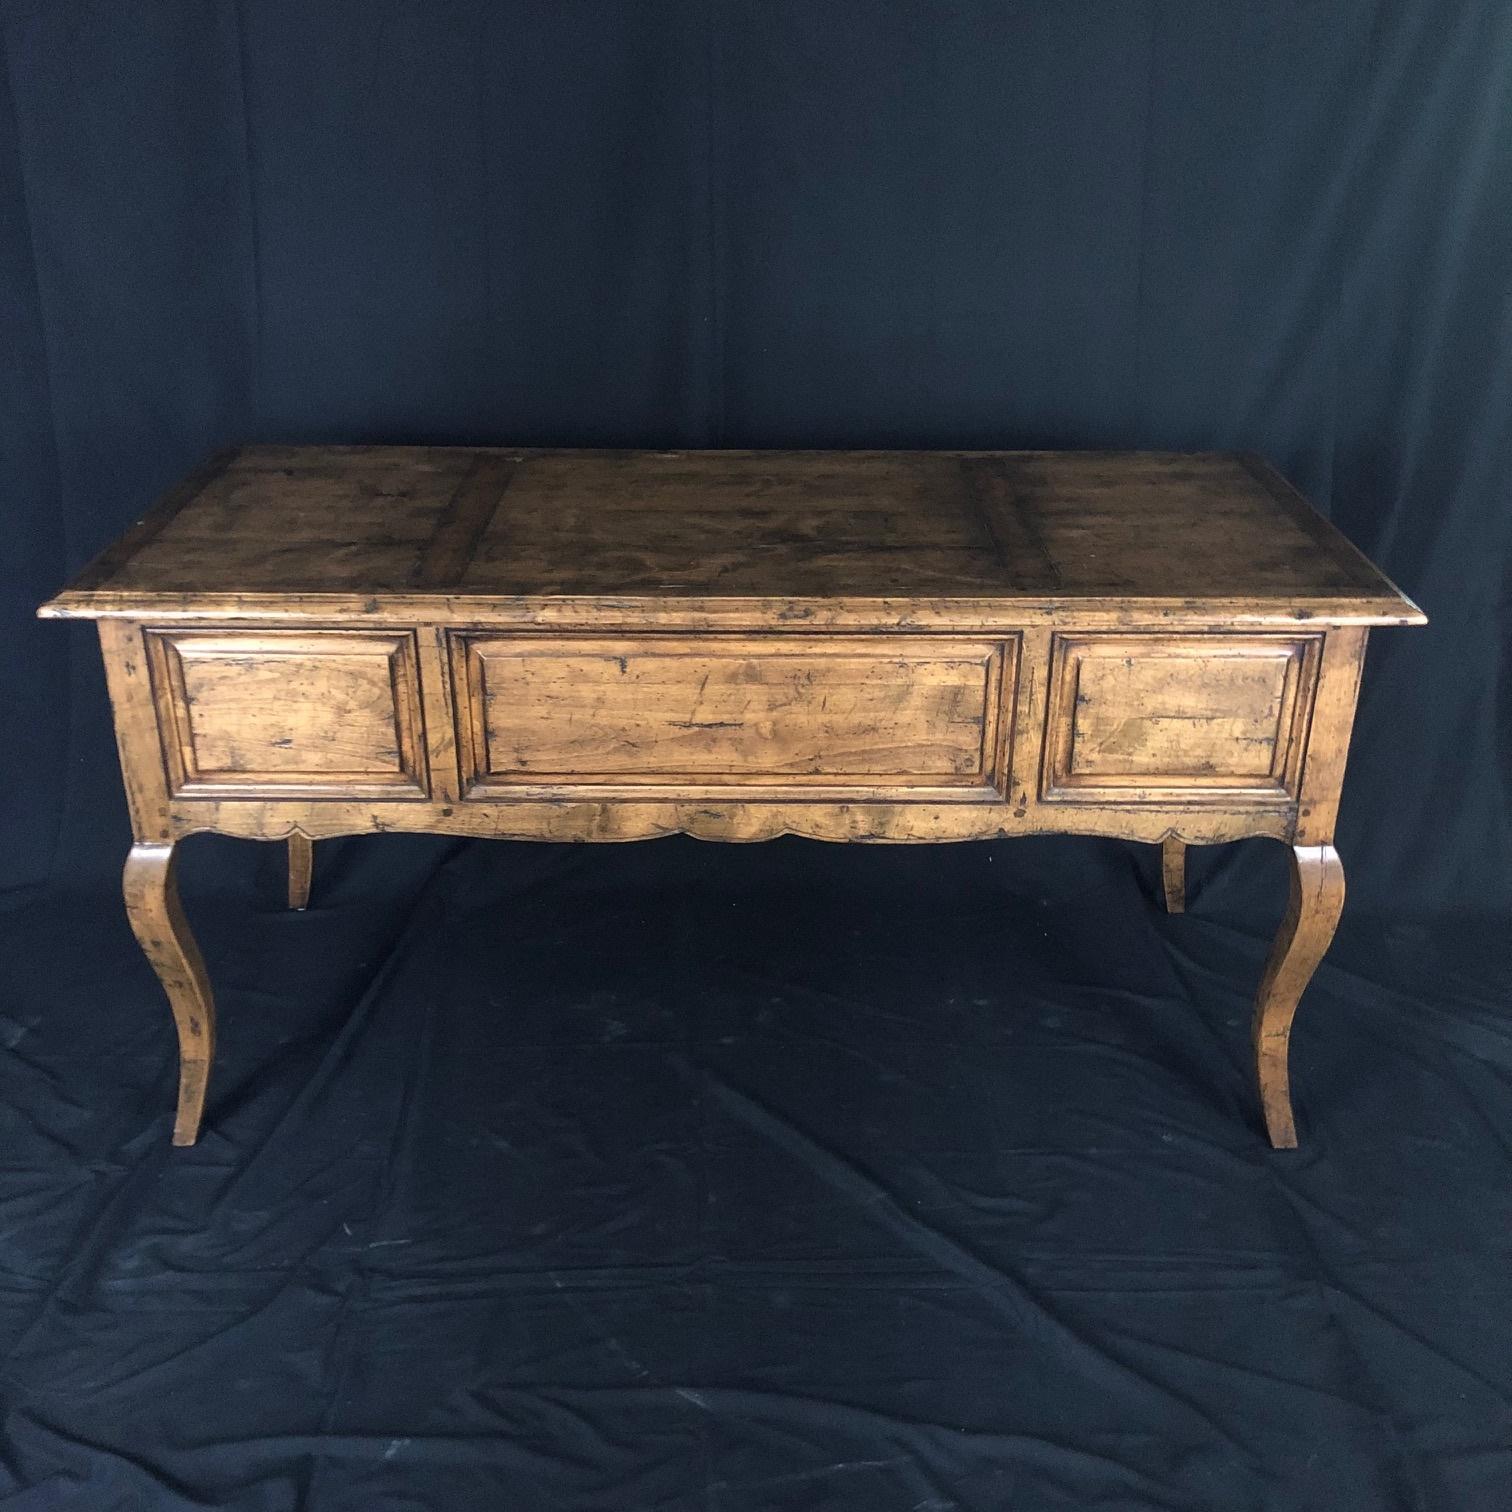 A lovely country French Provincial desk by Guy Chaddock from the Melrose Collection. The desk is made of mixed light woods featuring raised inset panels throughout, an inset paneled top and tapered cabriole legs. The desk is designed with a center